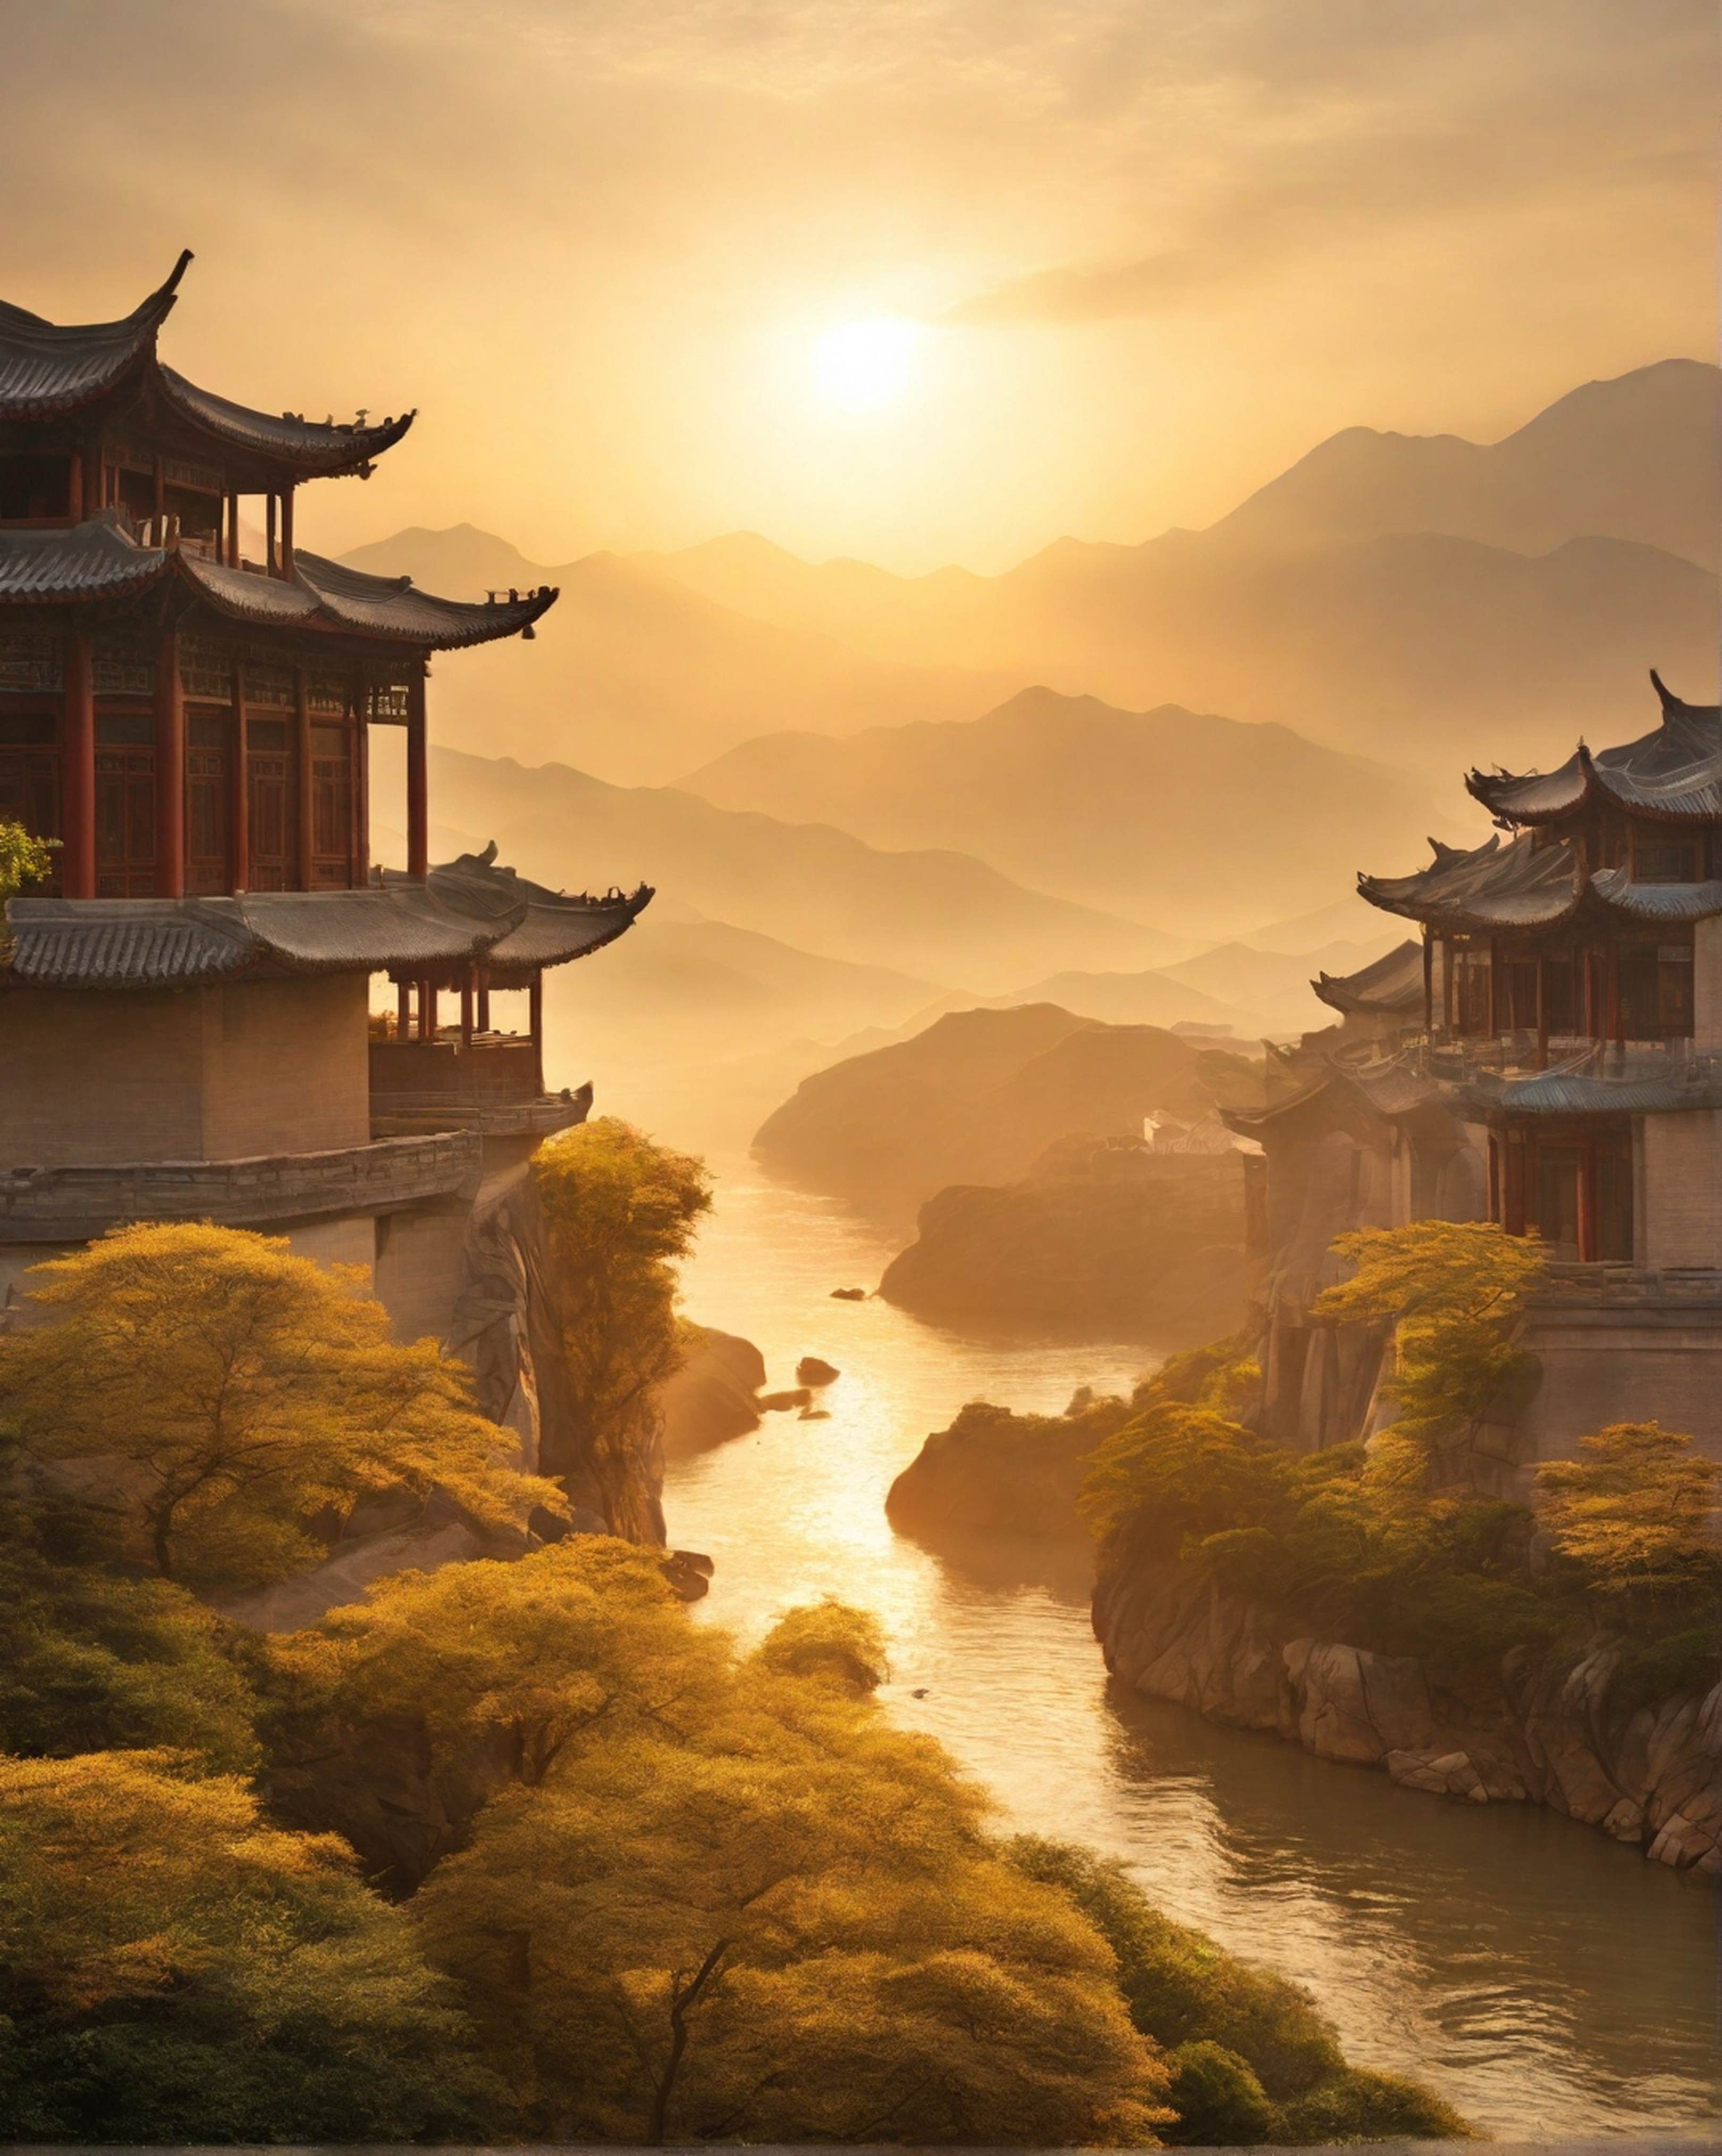 Nature's Detail: The Spectacular Sunrise in China